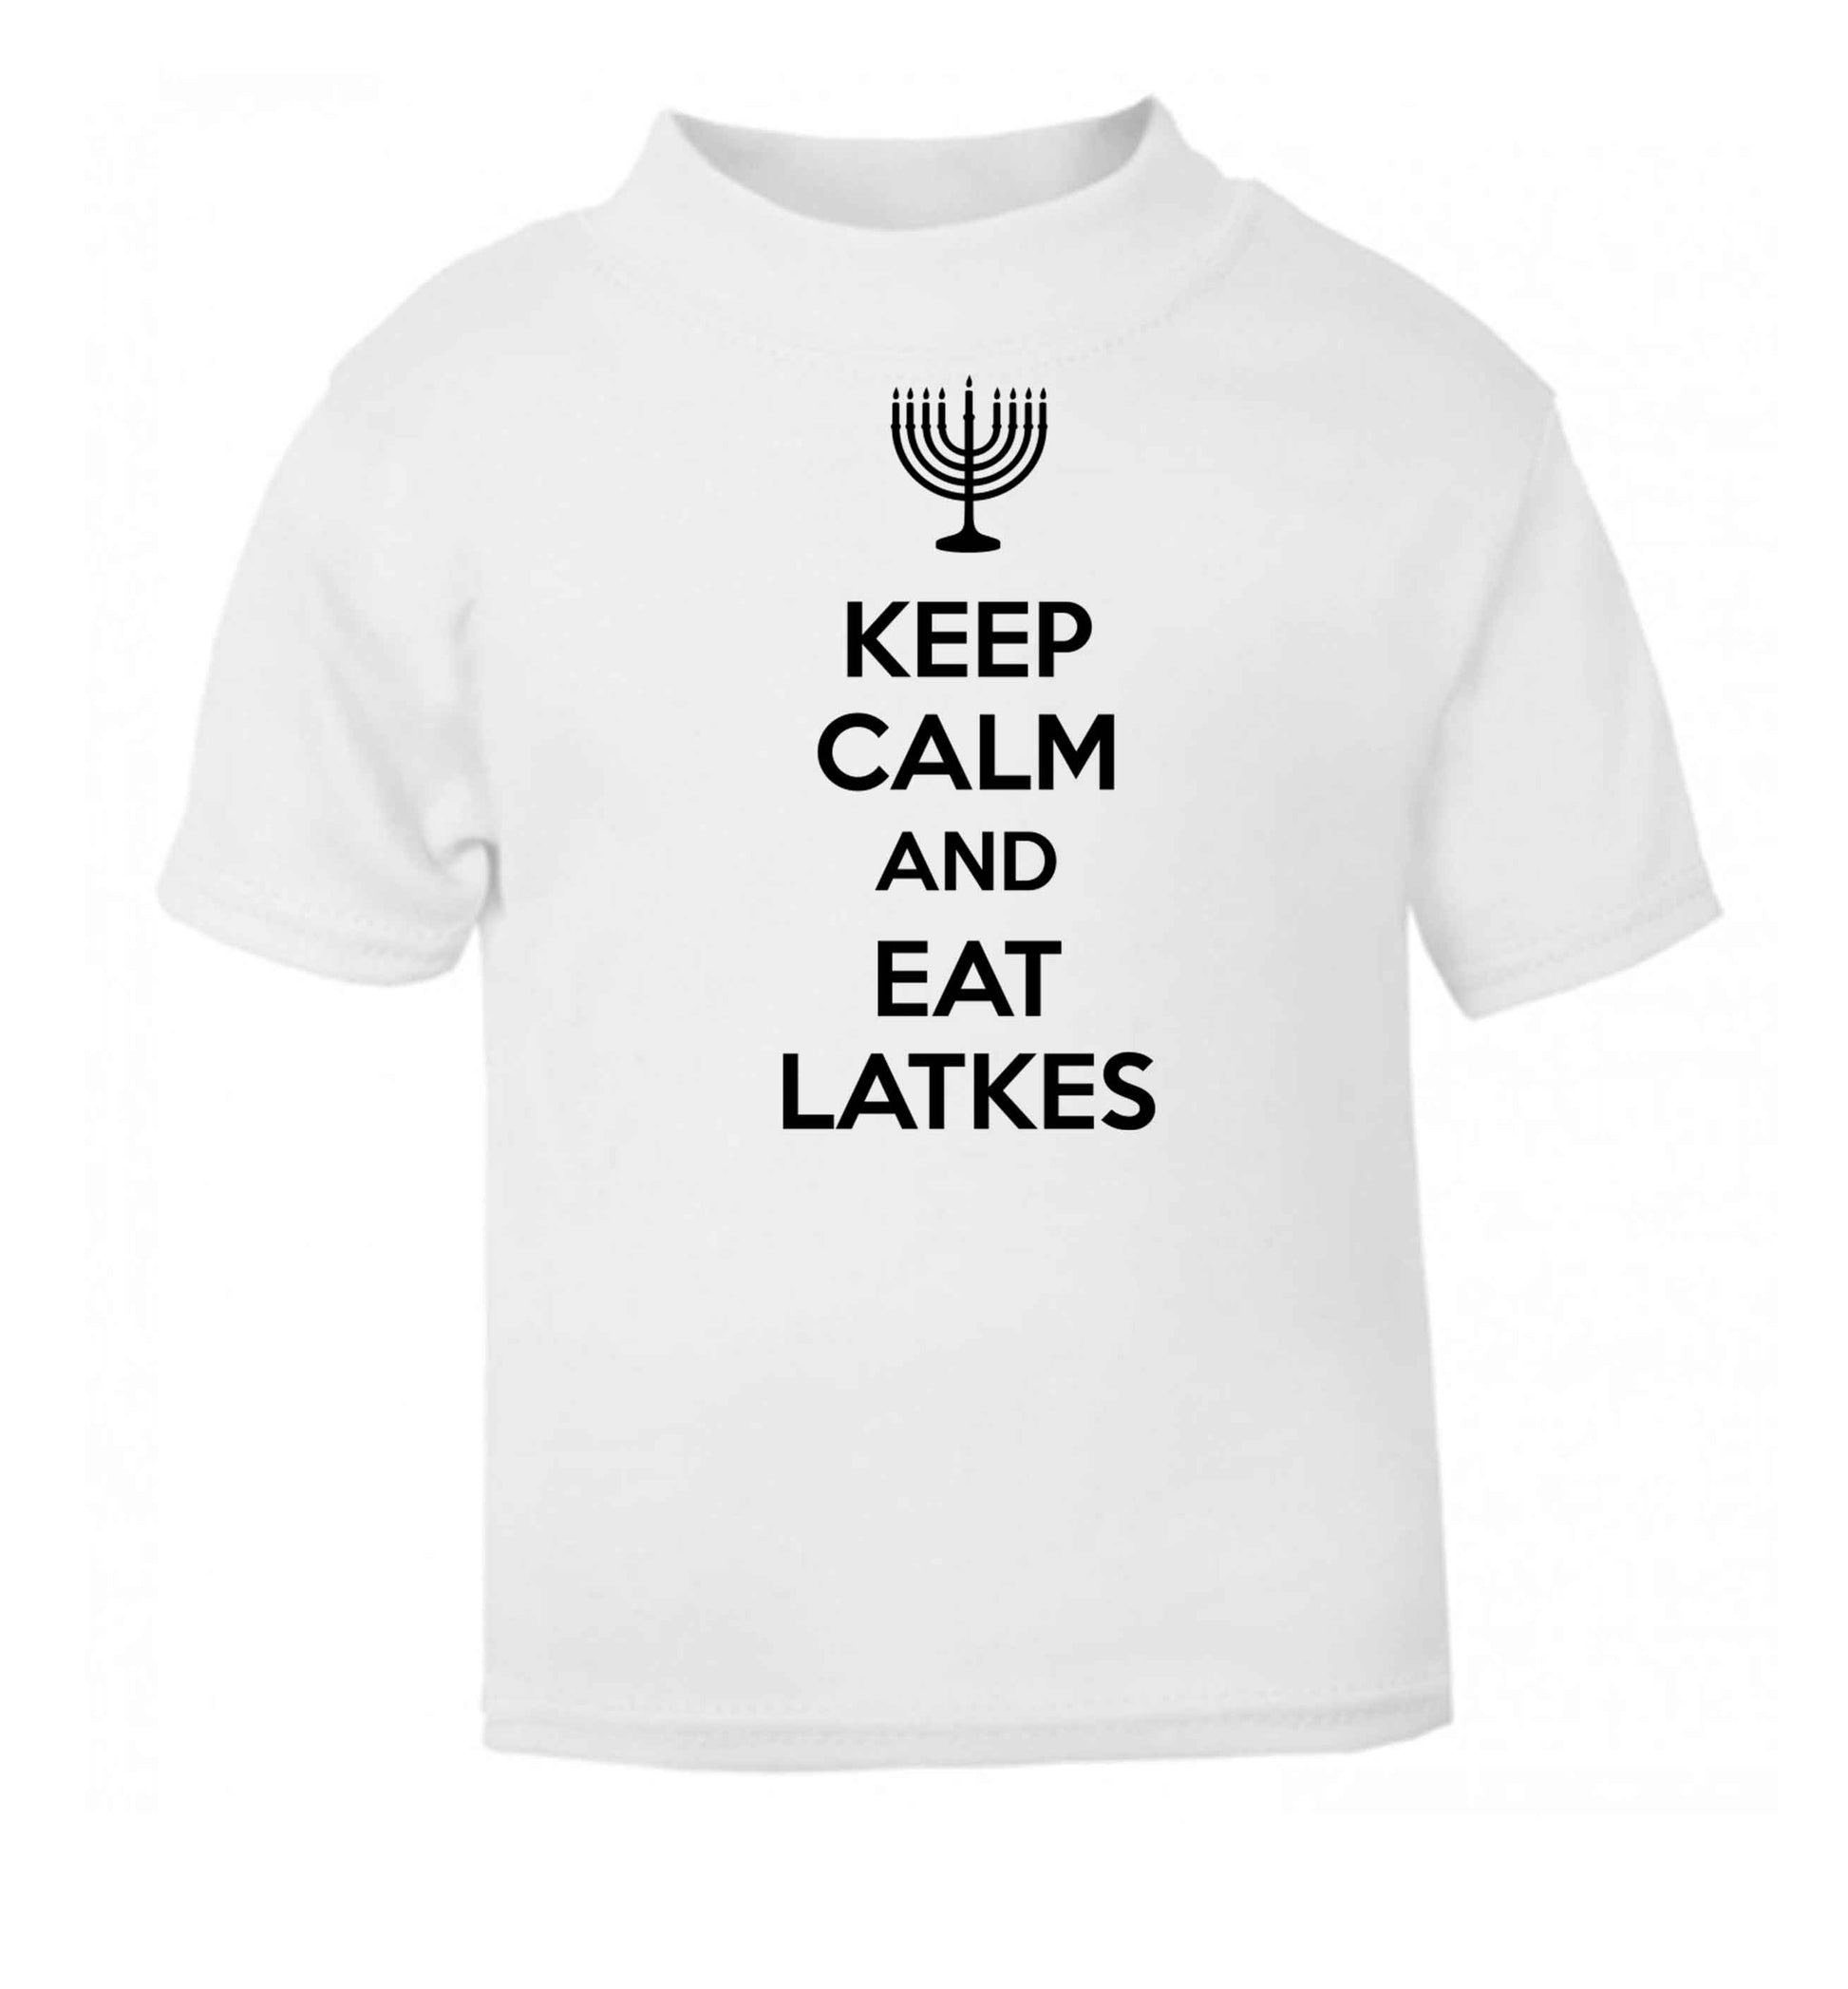 Keep calm and eat latkes white baby toddler Tshirt 2 Years